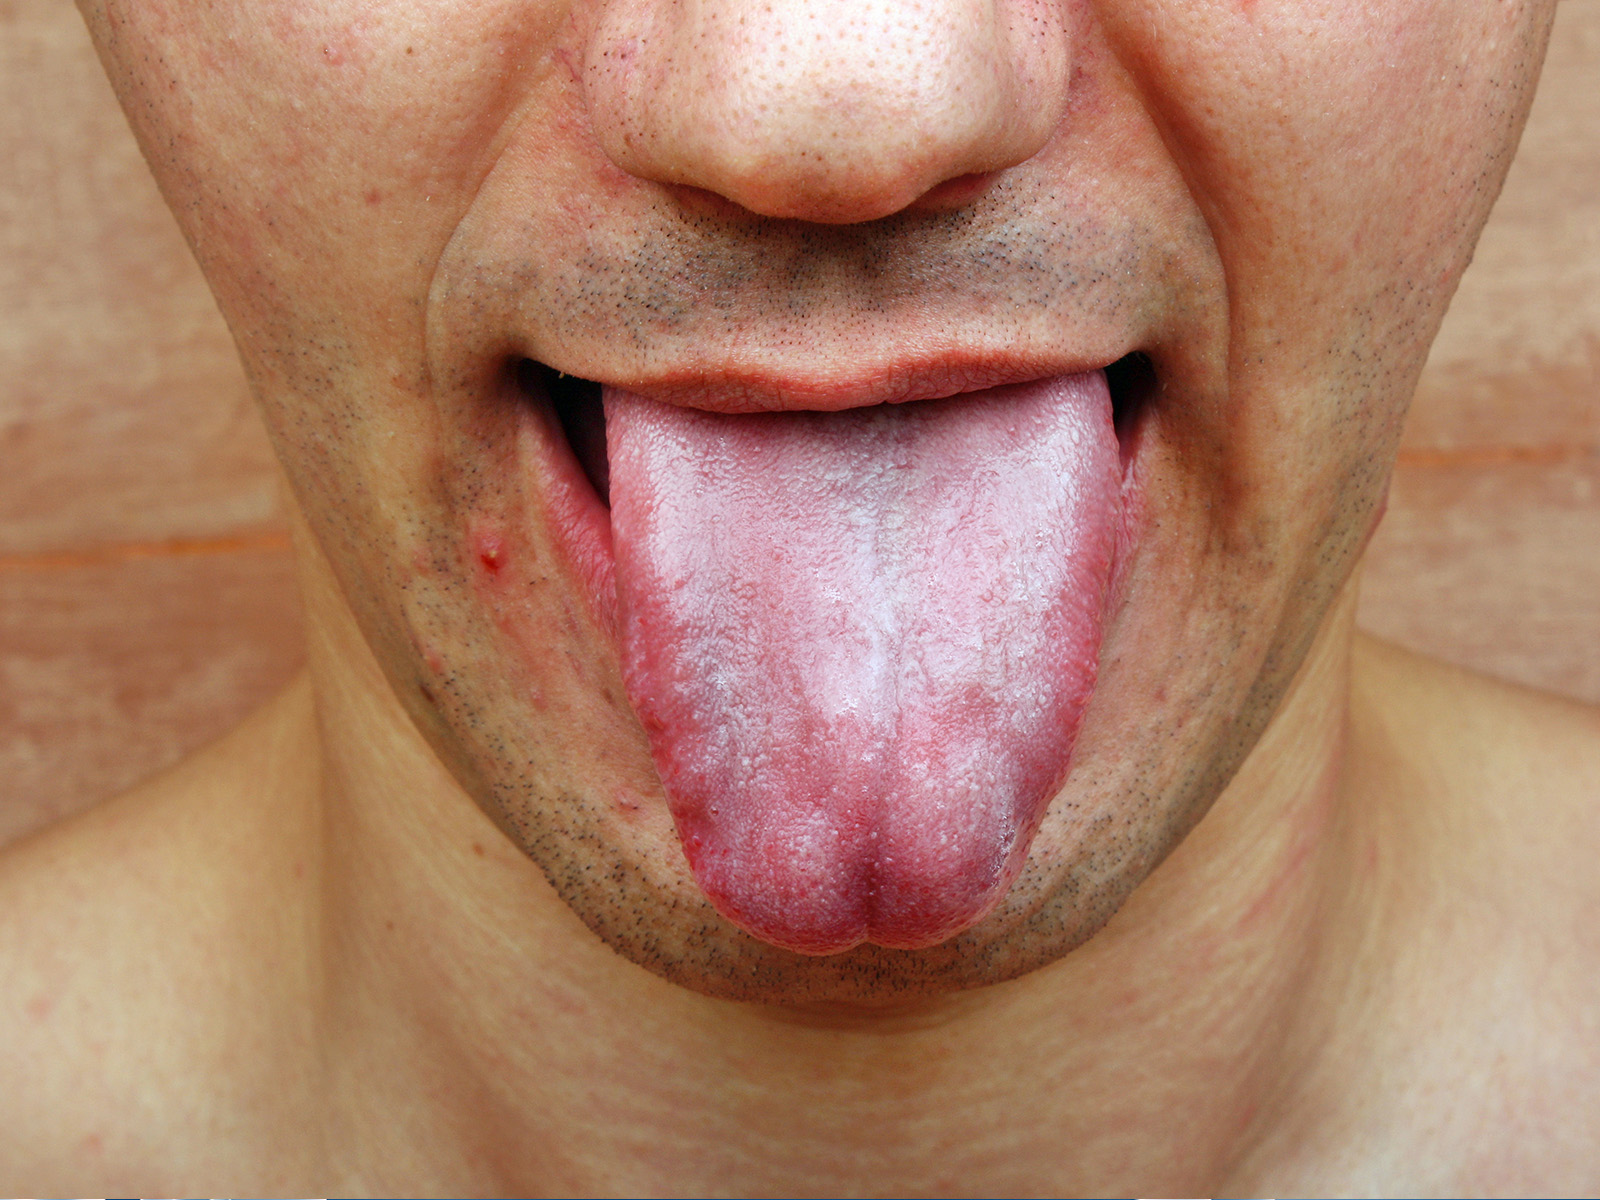 Burning Tongue: 5 Common Causes & How To Treat